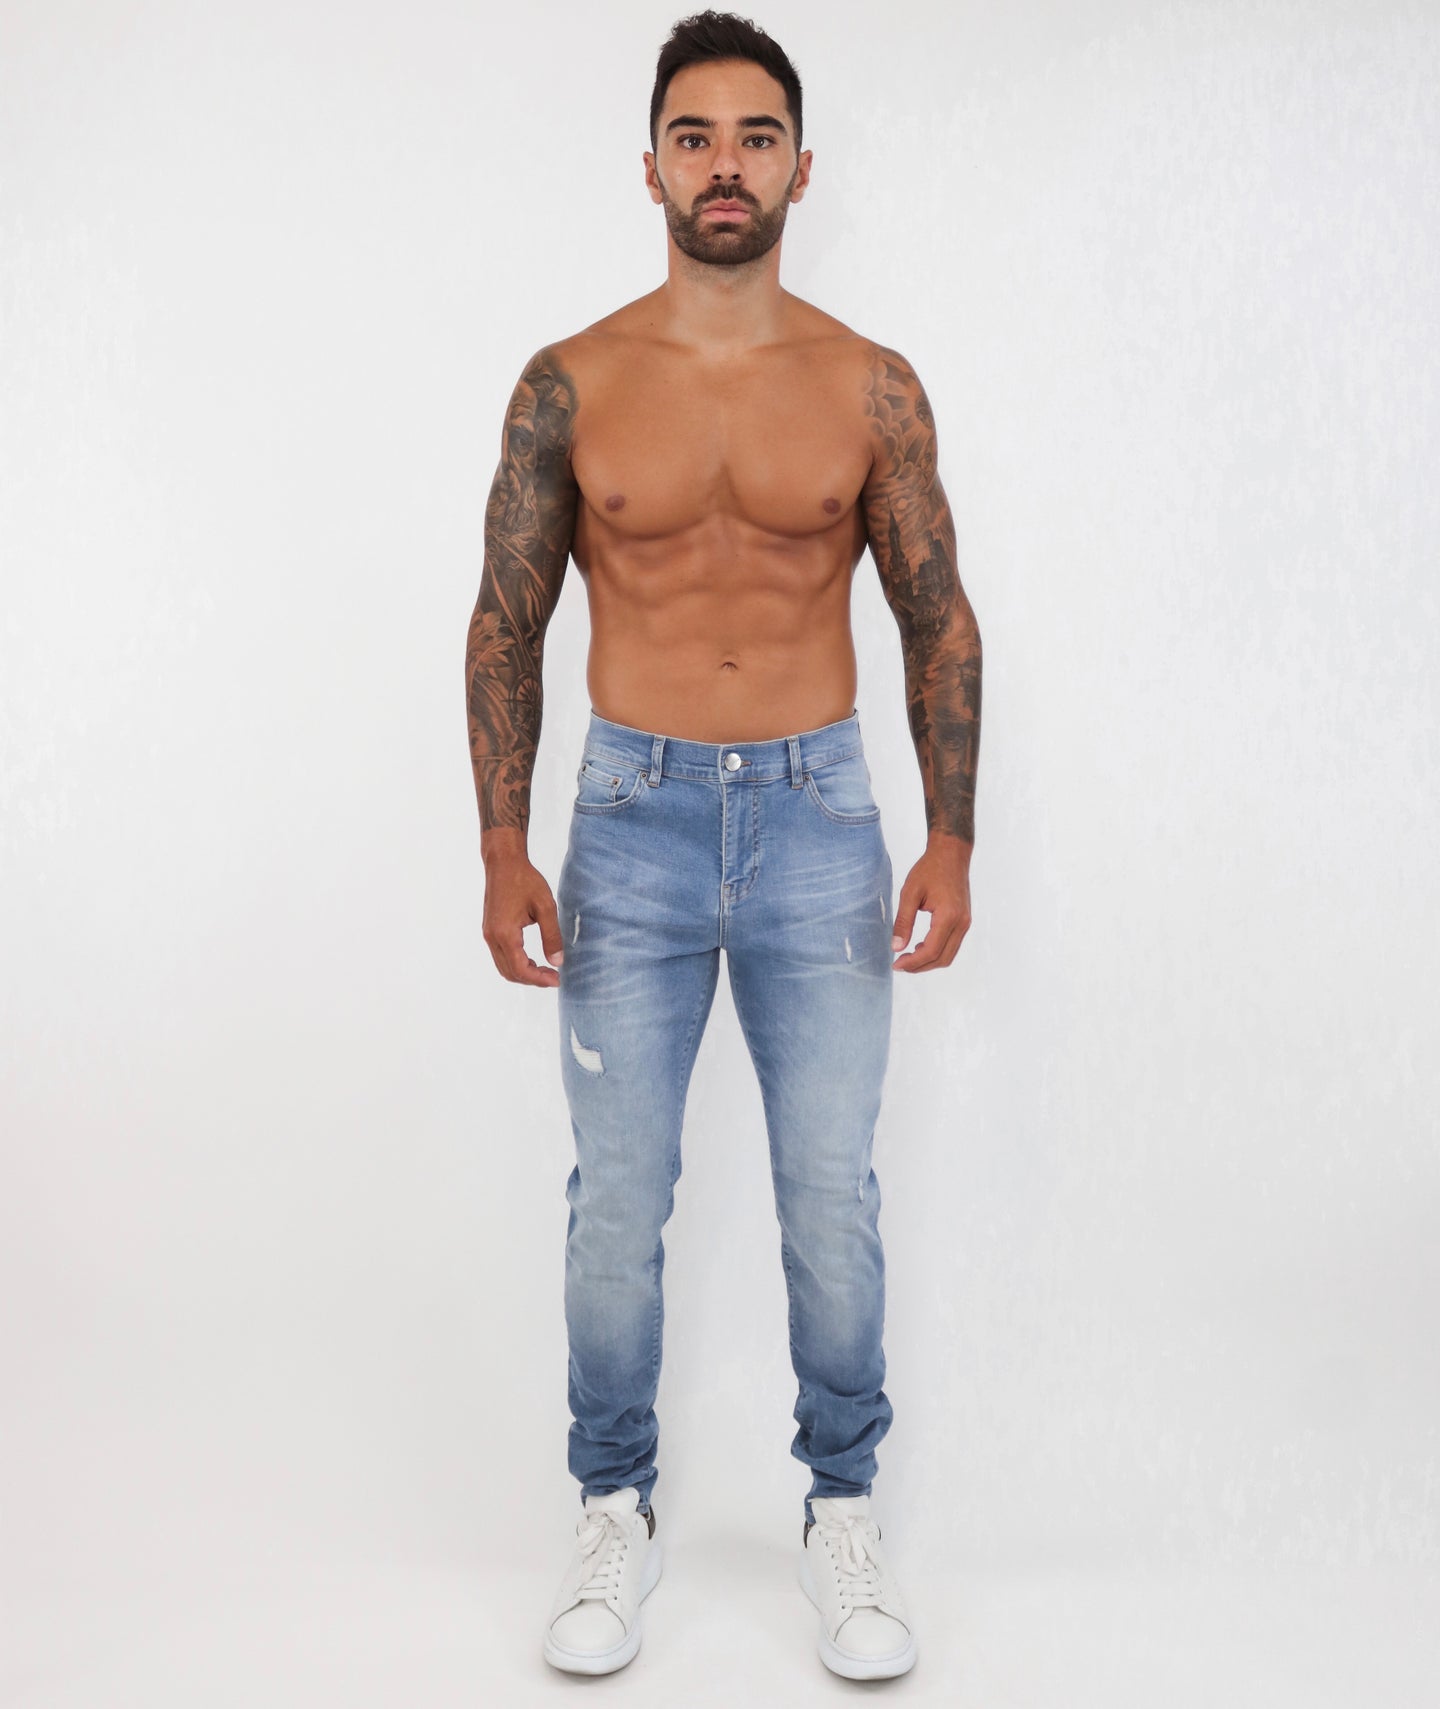 Light Blue Skinny Jeans Small Repaired